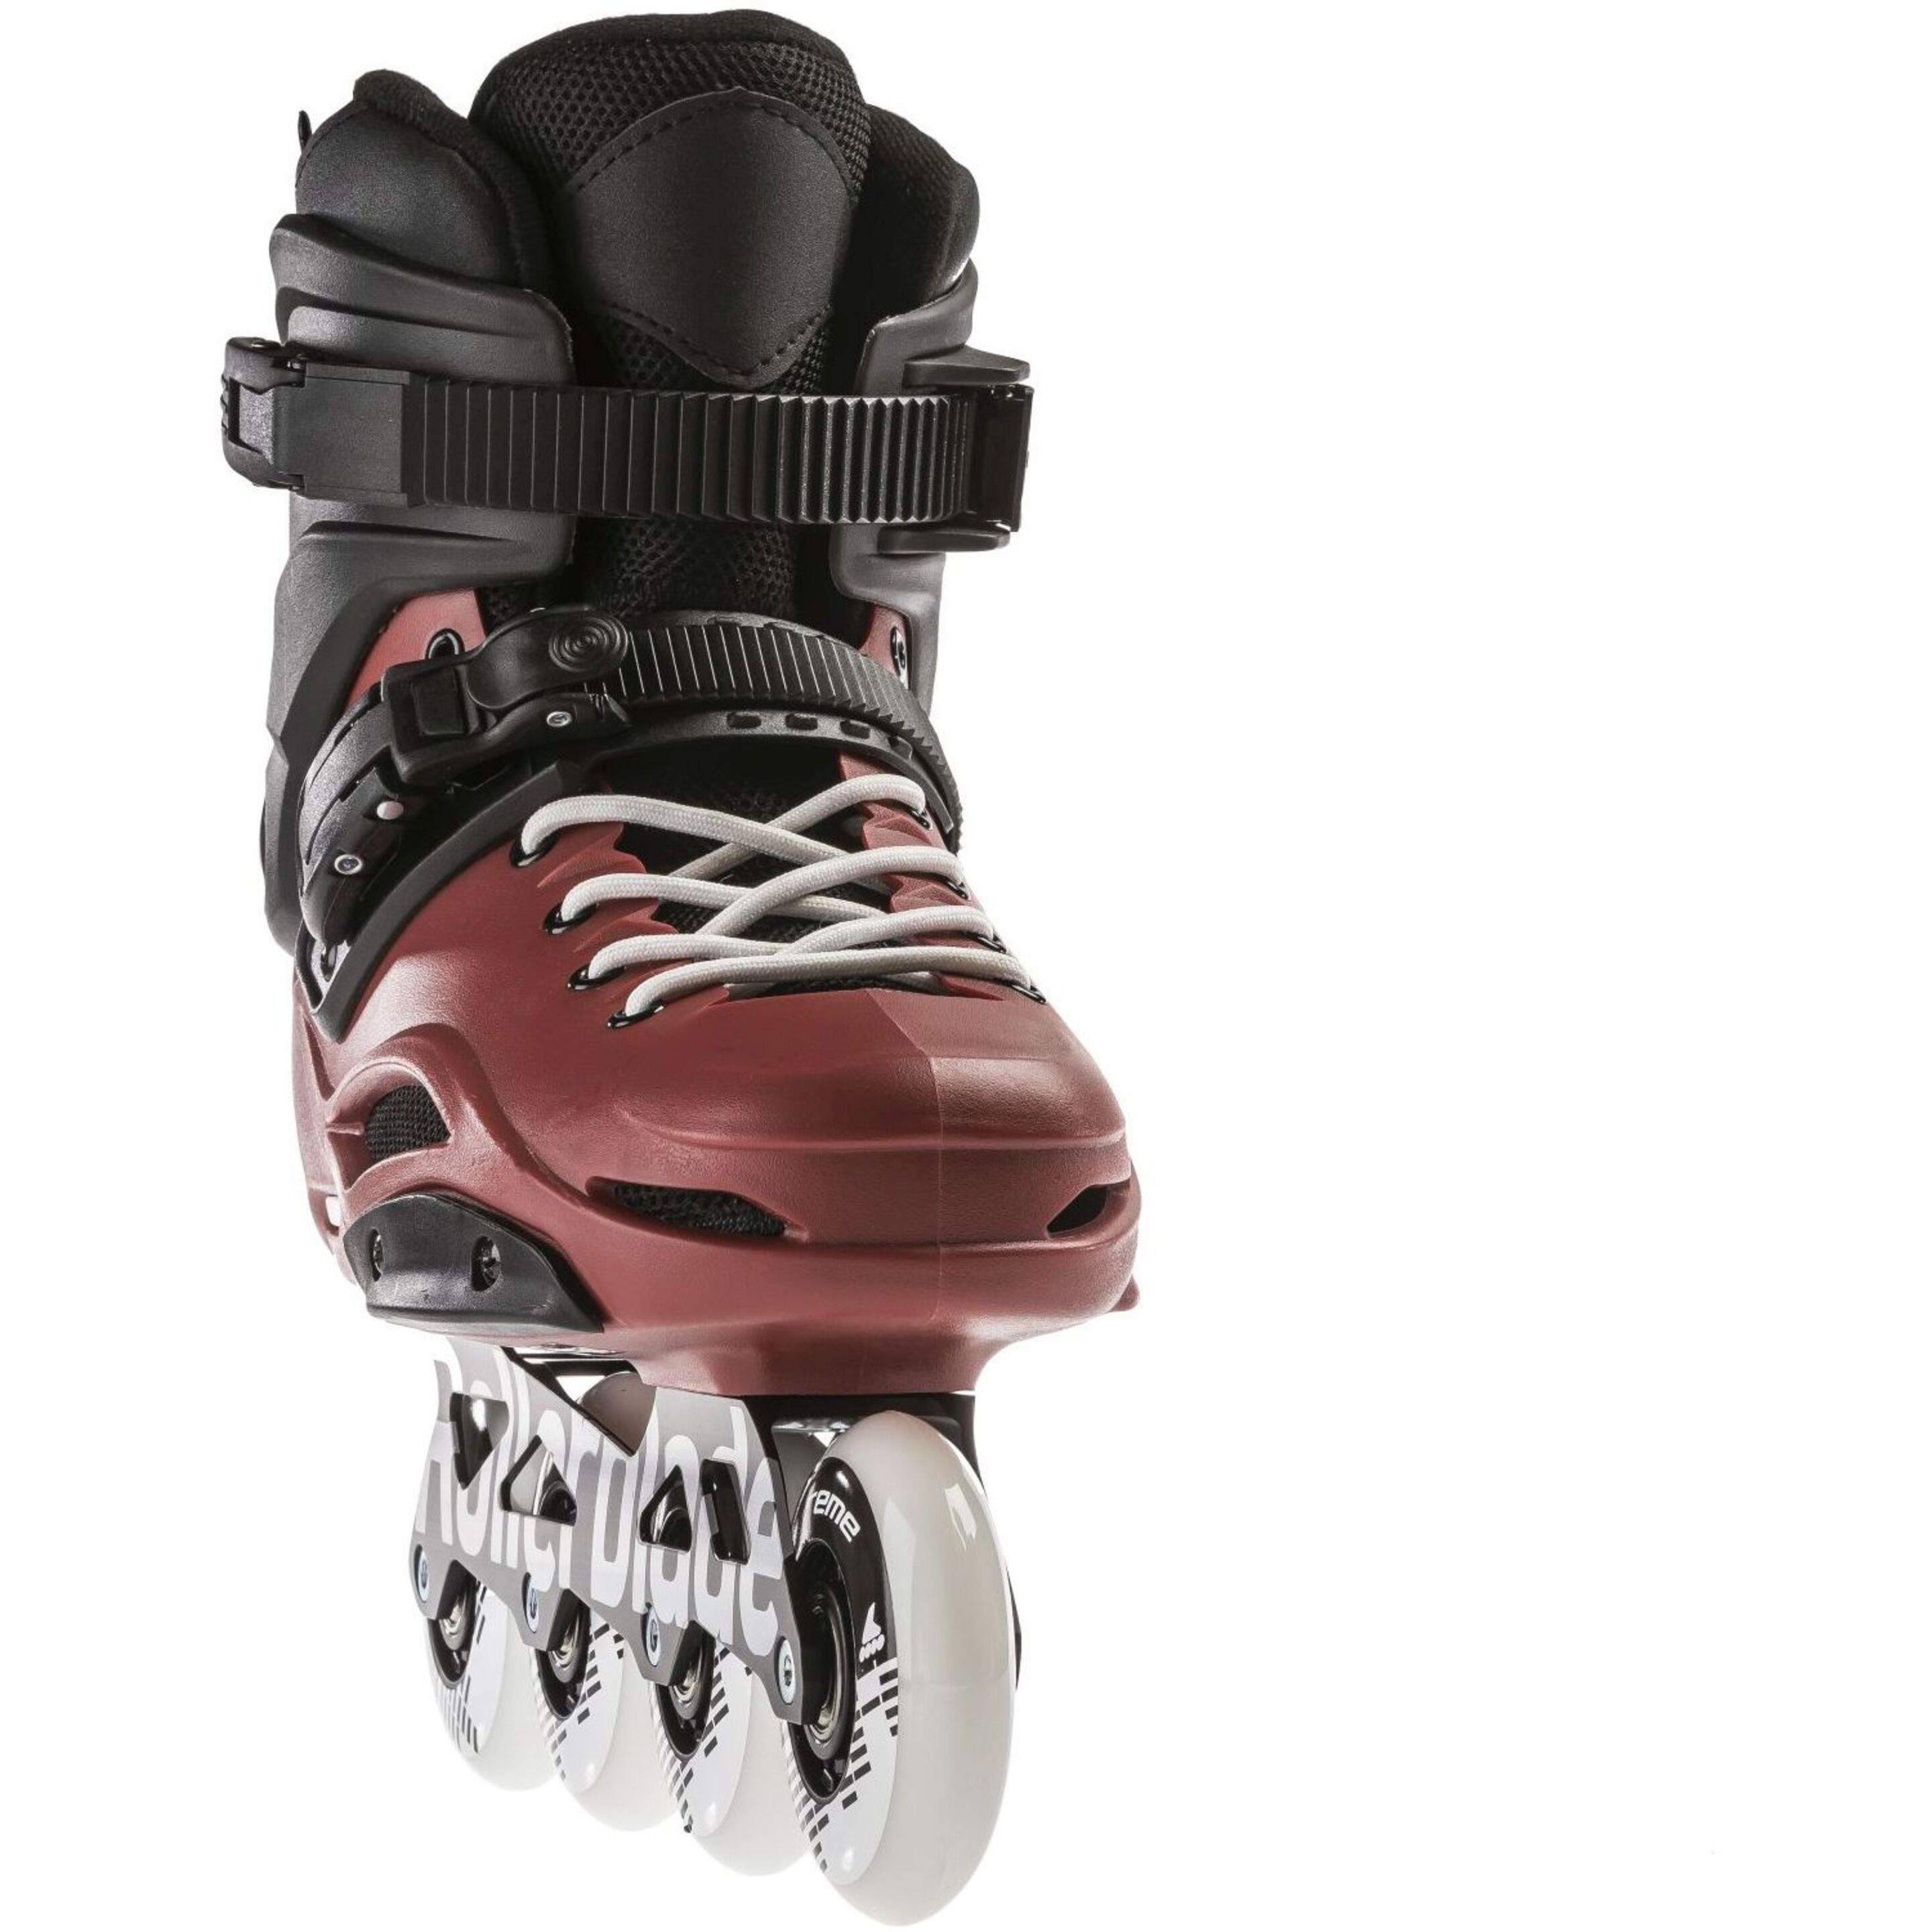 Patines Rb 80 Pro Rollerblade